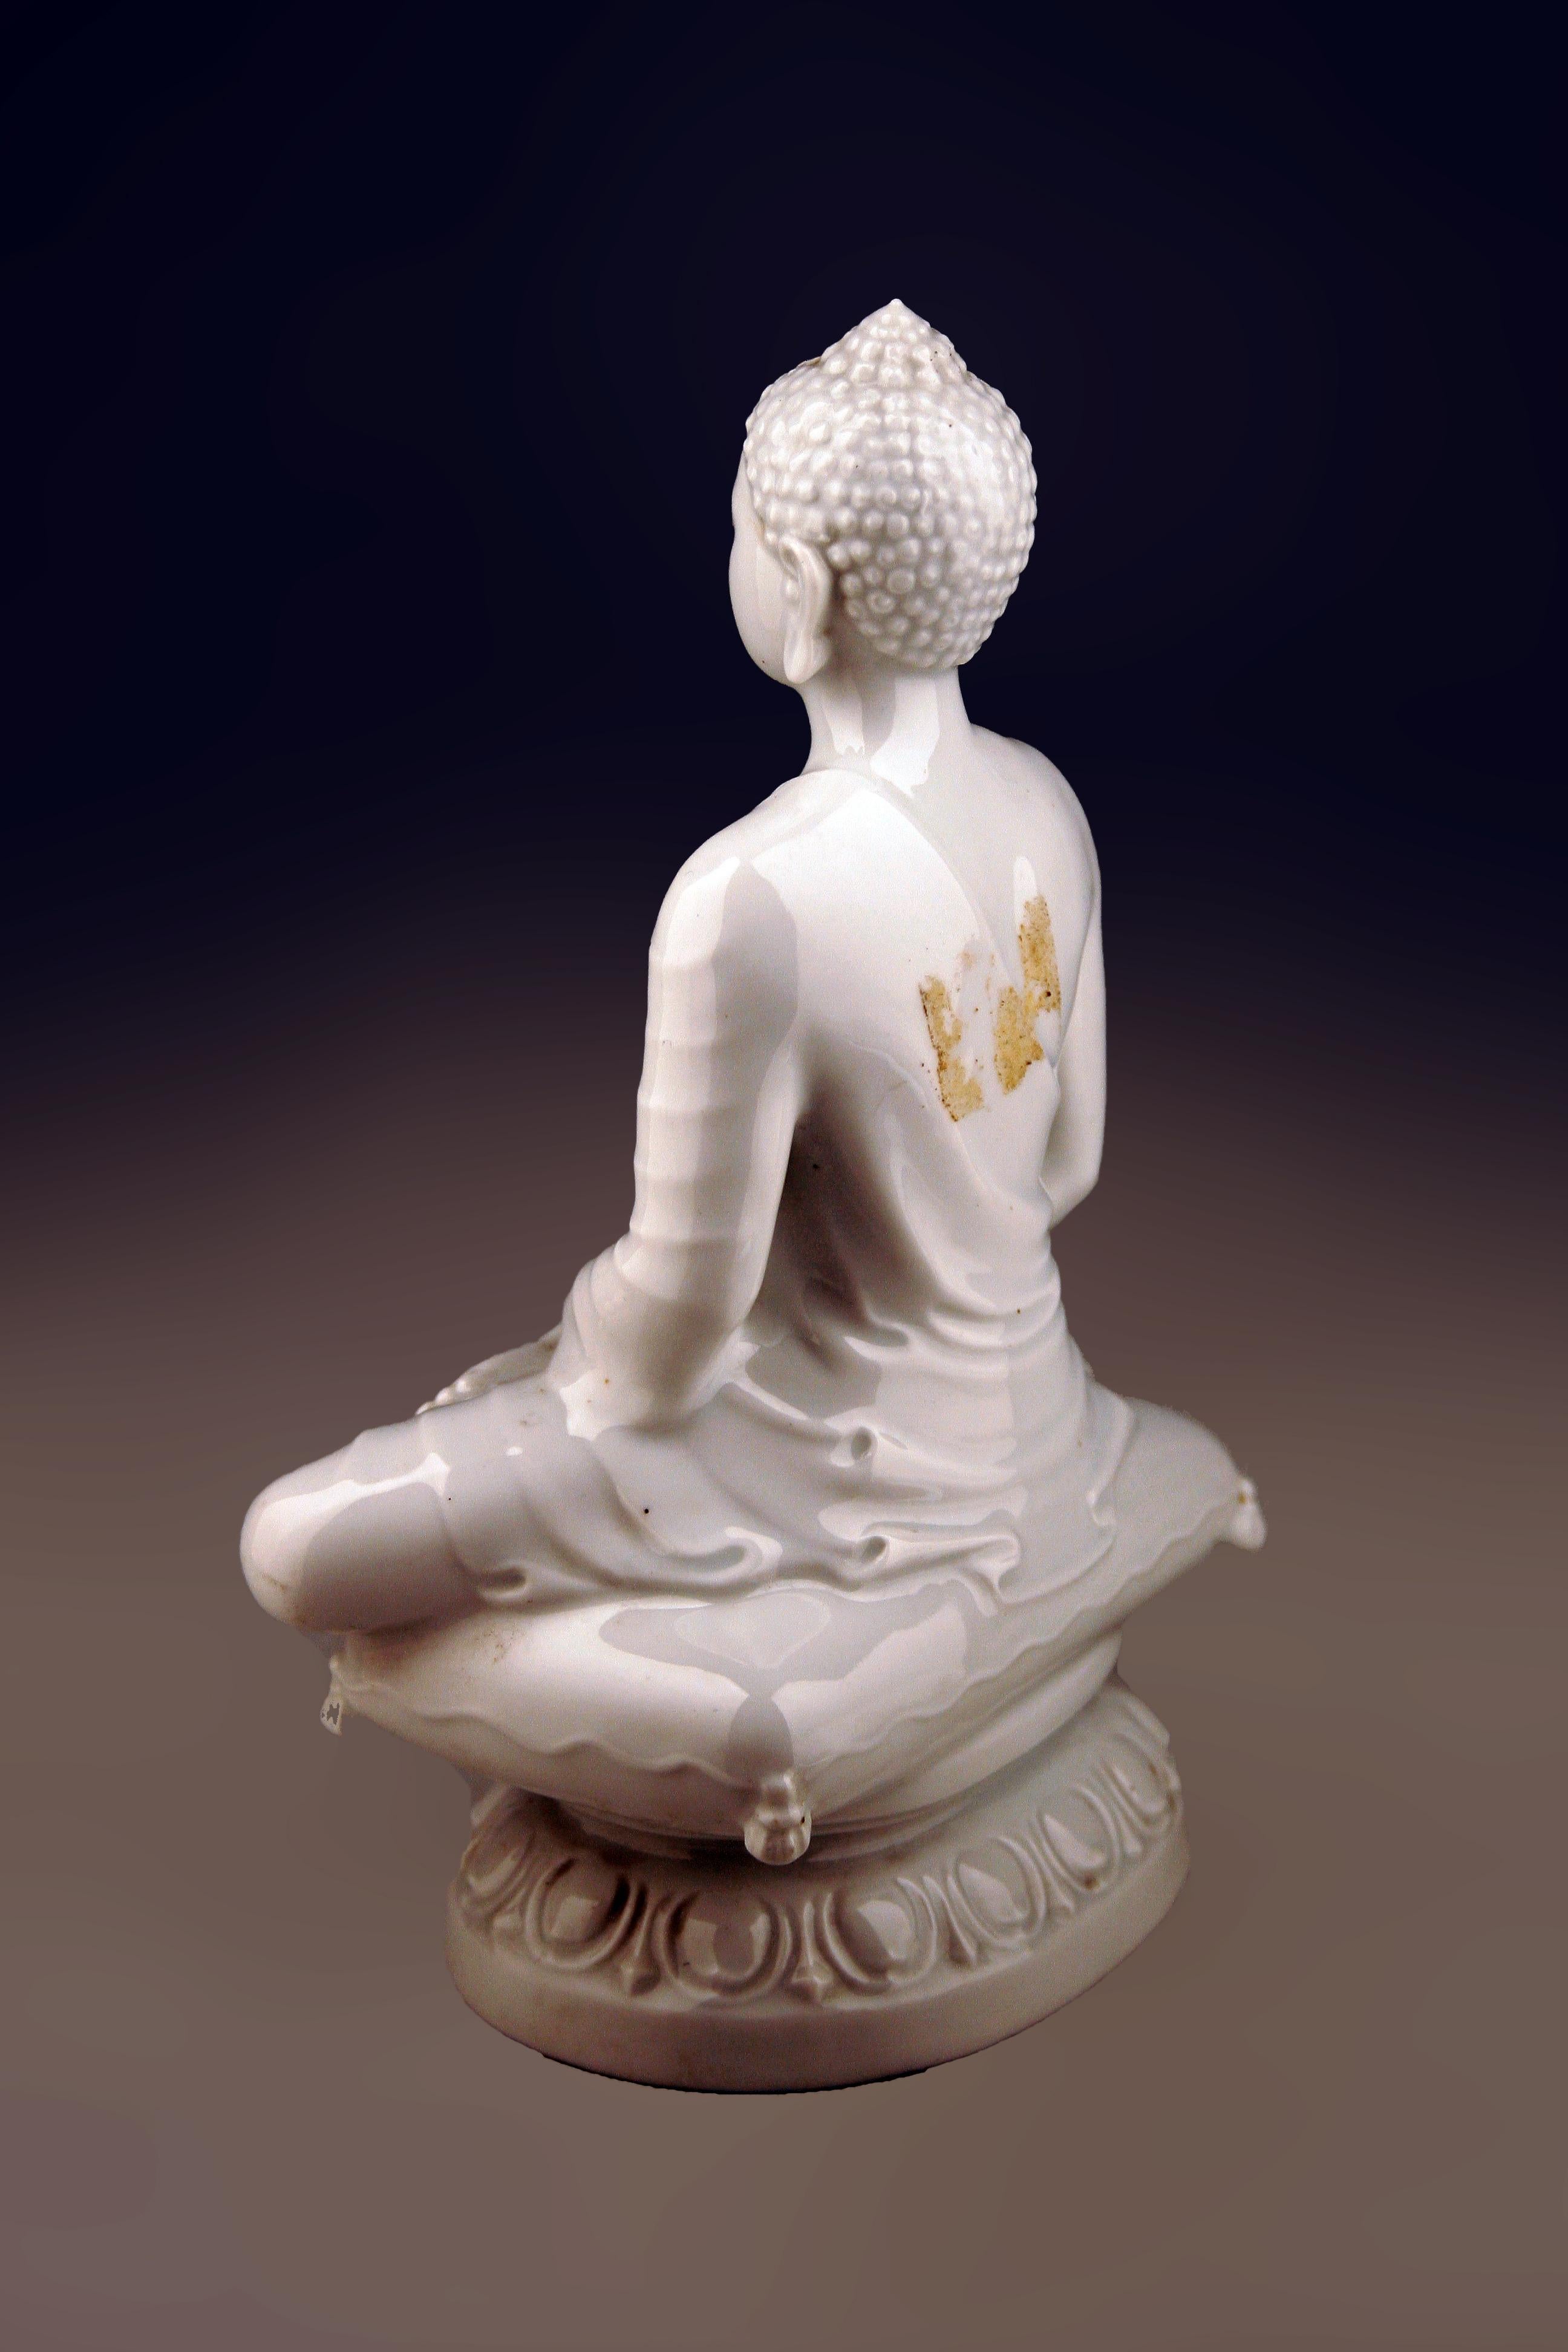 Art Deco Art Déco German Glazed Porcelain Sculpture of a Sitting Buddha by Rosenthal For Sale